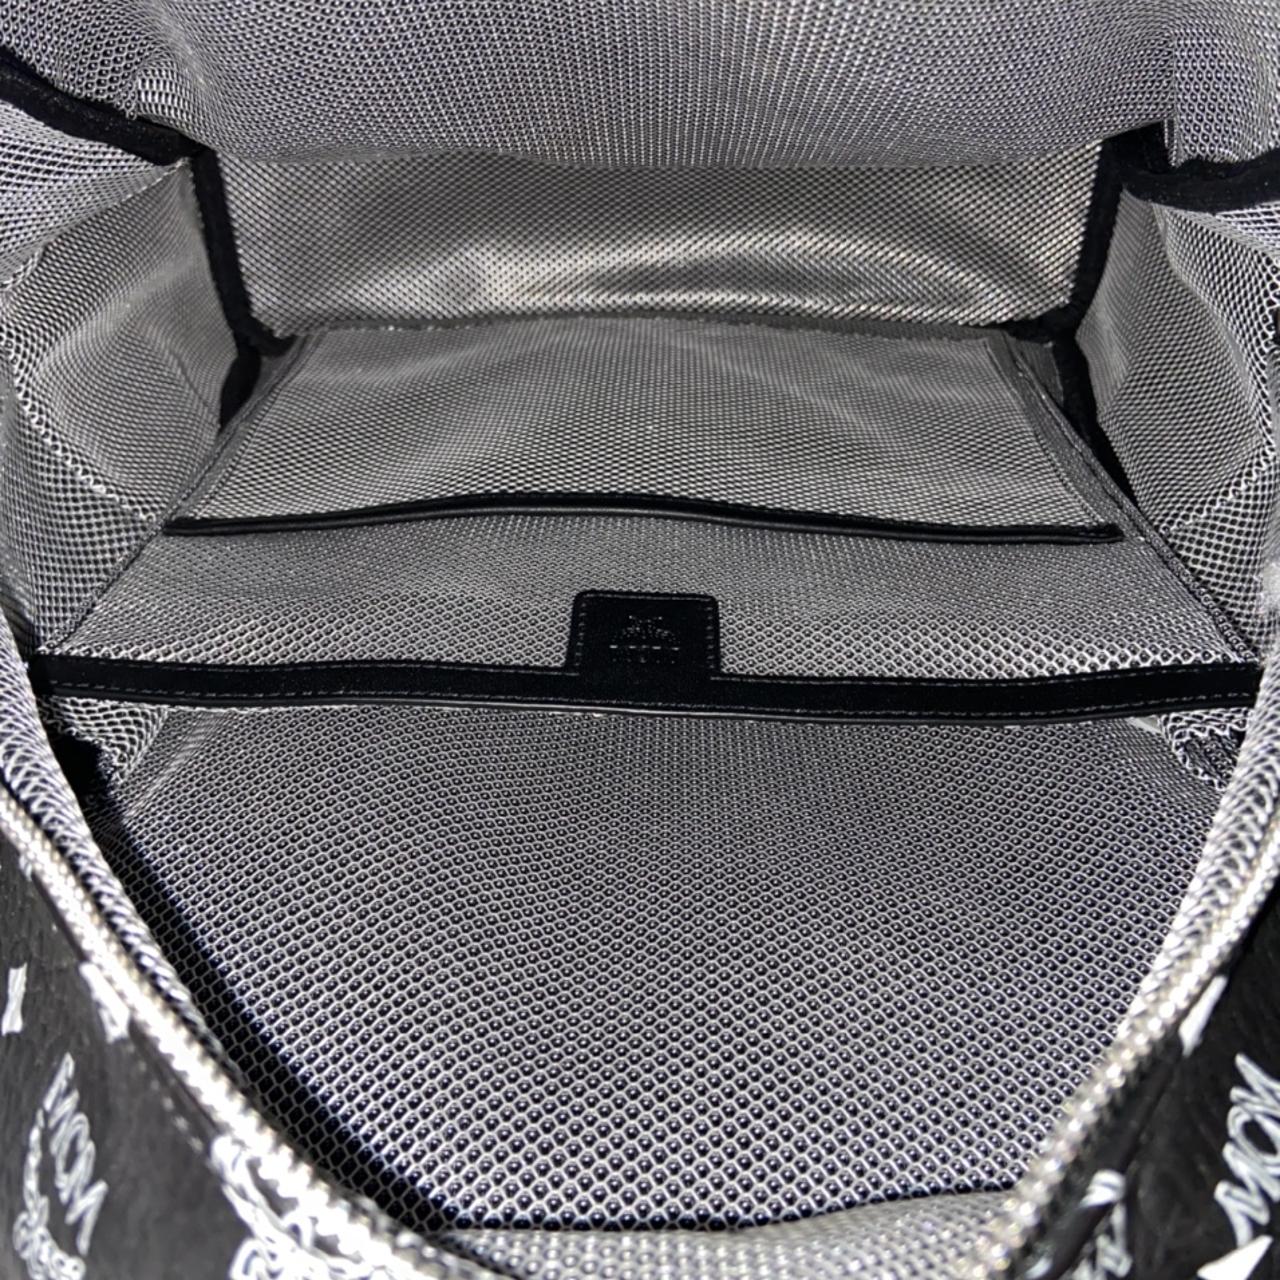 Unisex Rare Mcm Sidebag open to offers but no lowballs - Depop